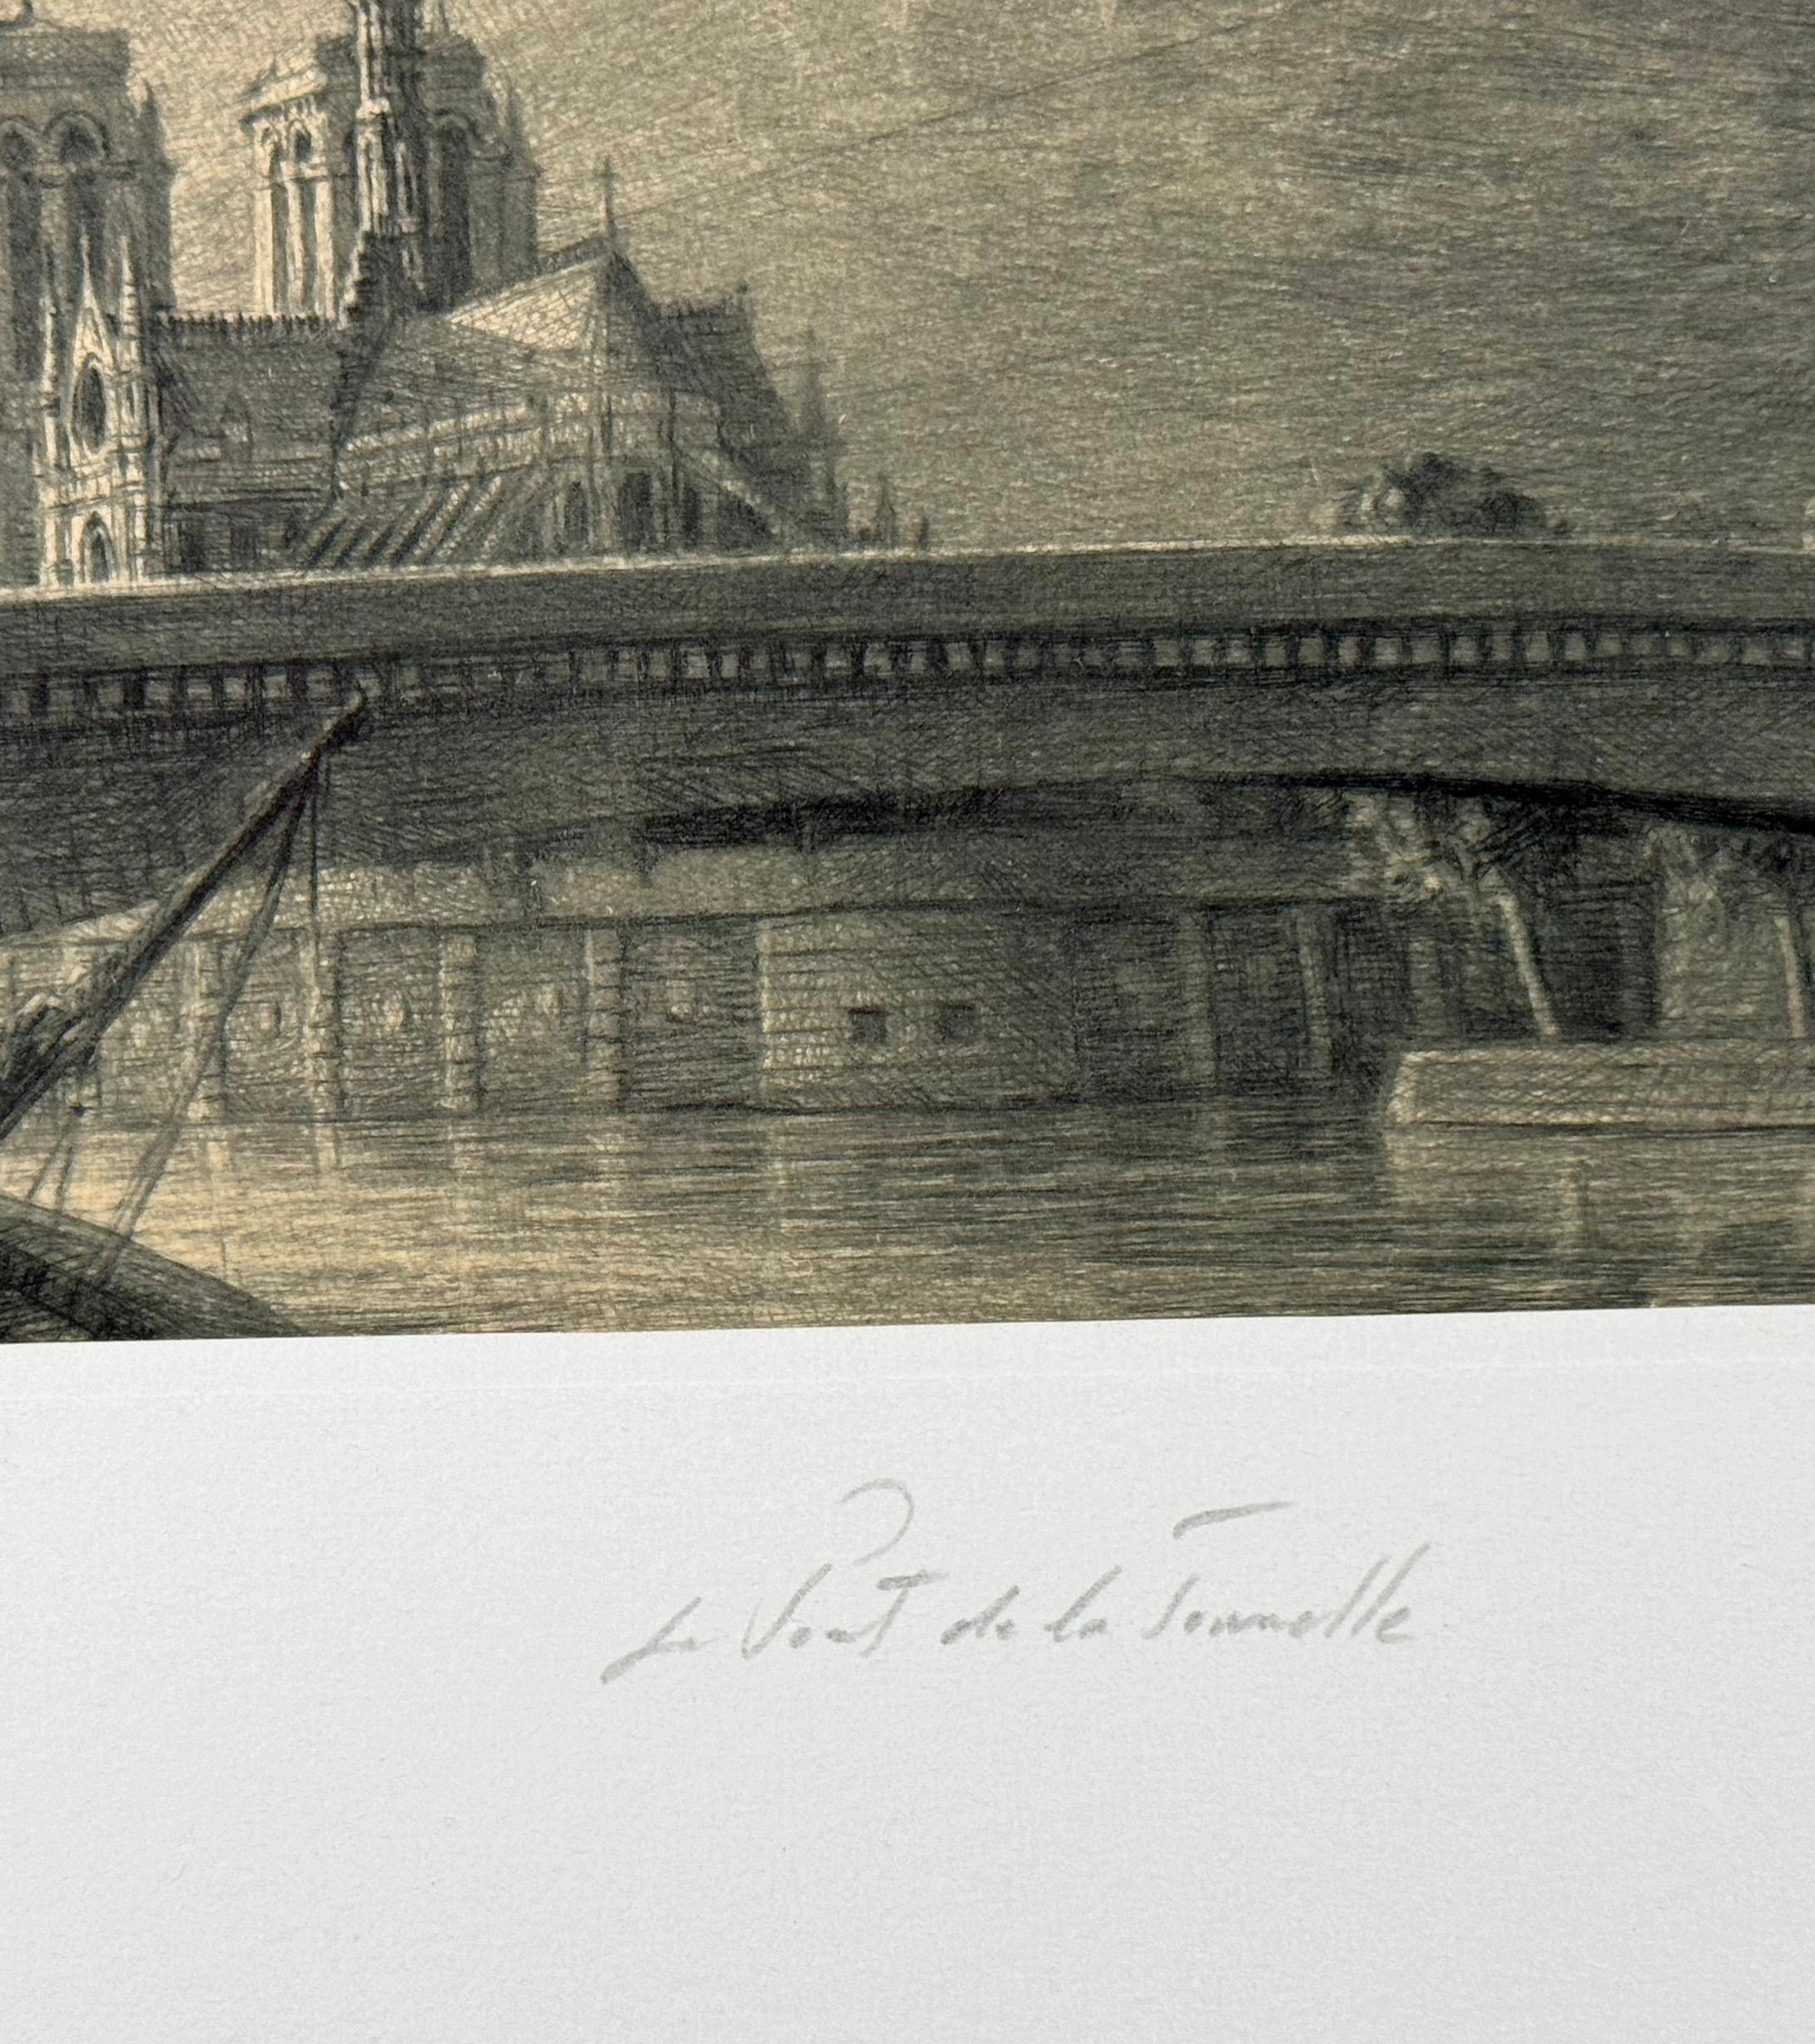 Medium: drypoint on chine collé
Edition of 180
Image Size: 4.5 X 9 inches

The Pont de la Tournelle links the Ile St-Louis to the Left Bank and is adorned with a giant statue of Sainte-Genevieve, one of the patron saints of Paris.

Mathieux-Marie